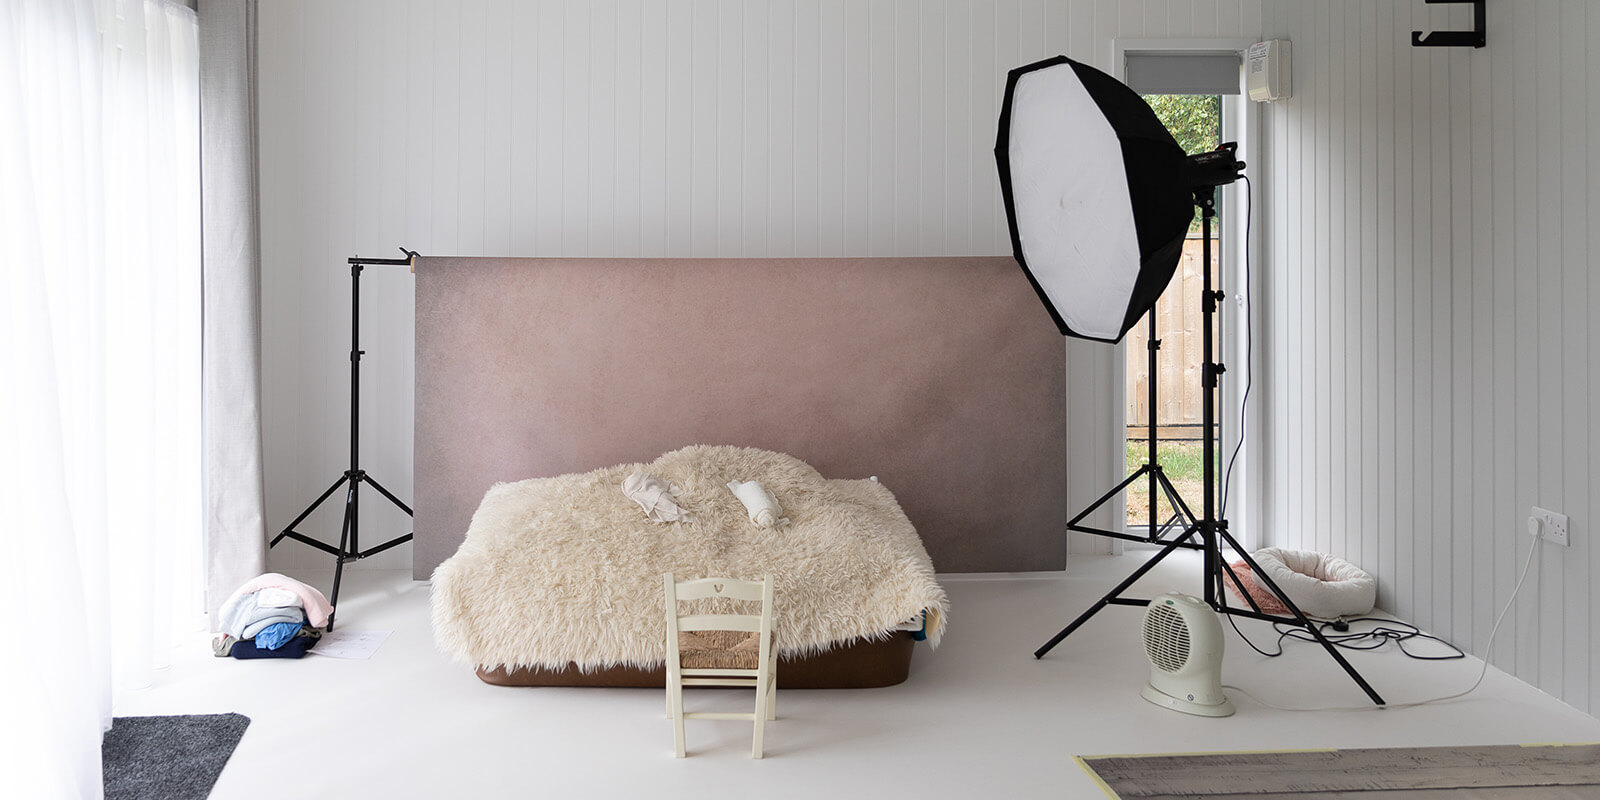 Home photo studio in garden, interior shot with backdrop, lighting and props  